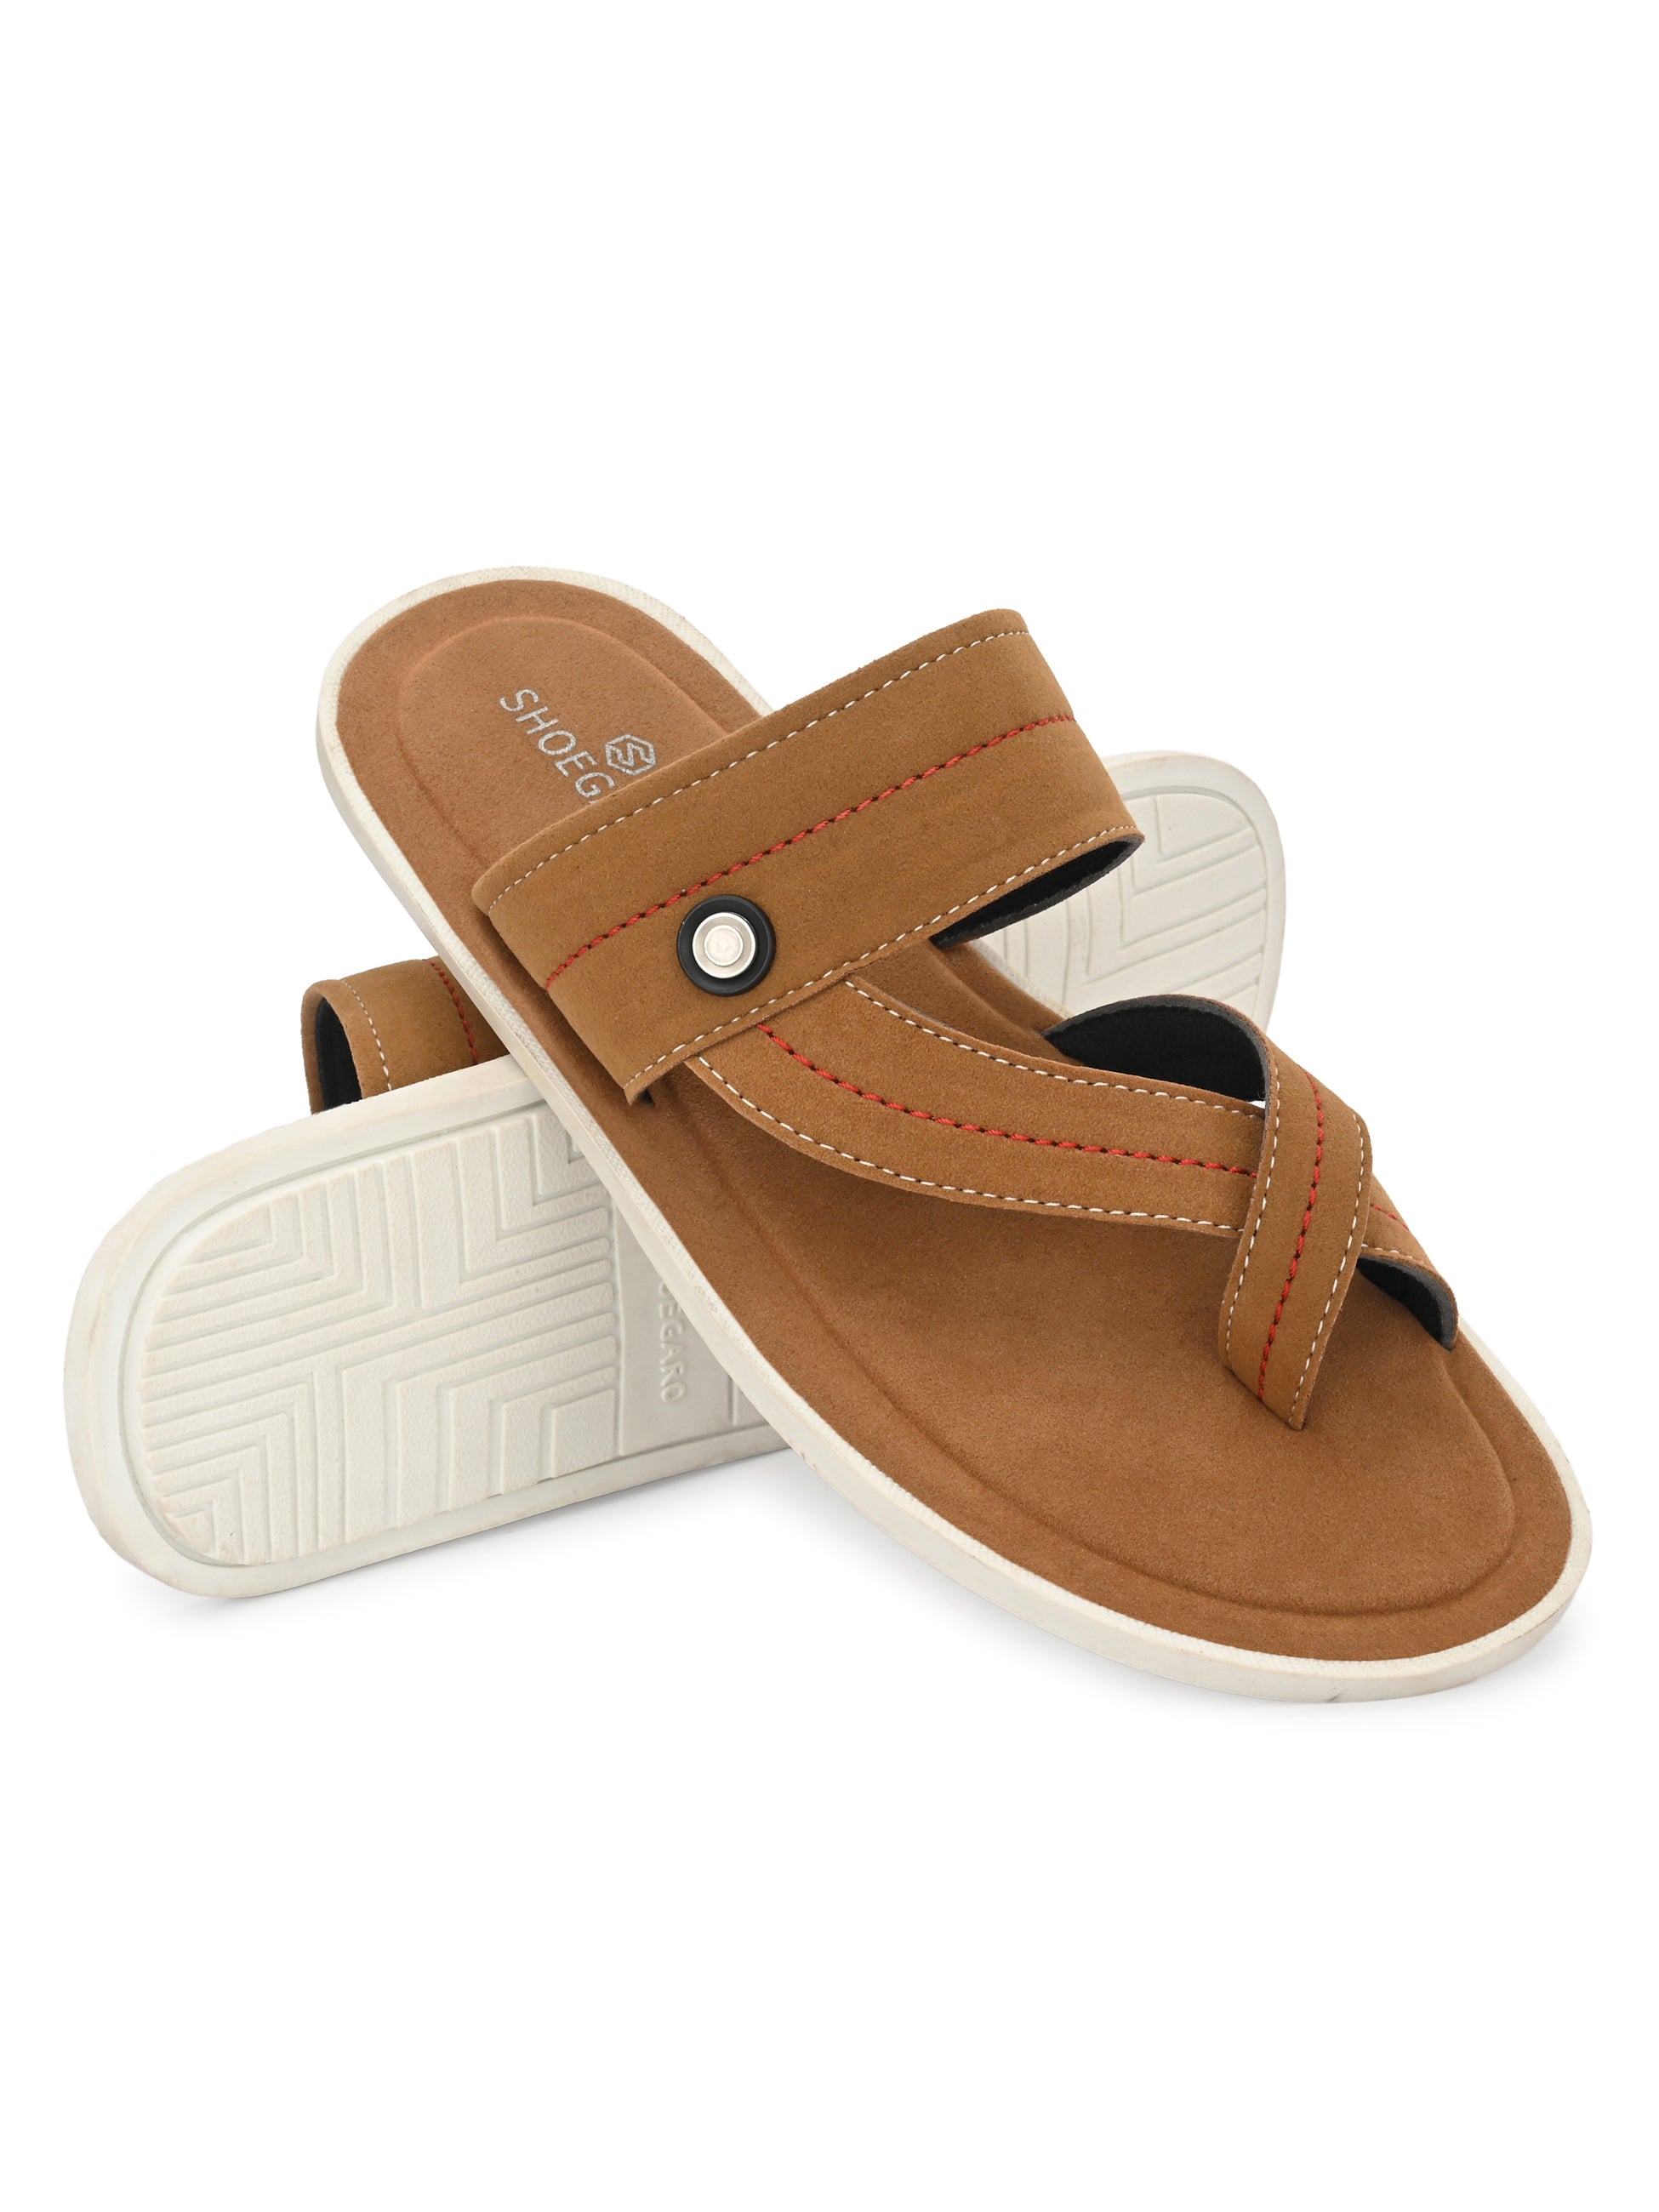 Comfy Tan Toe Ring Slippers